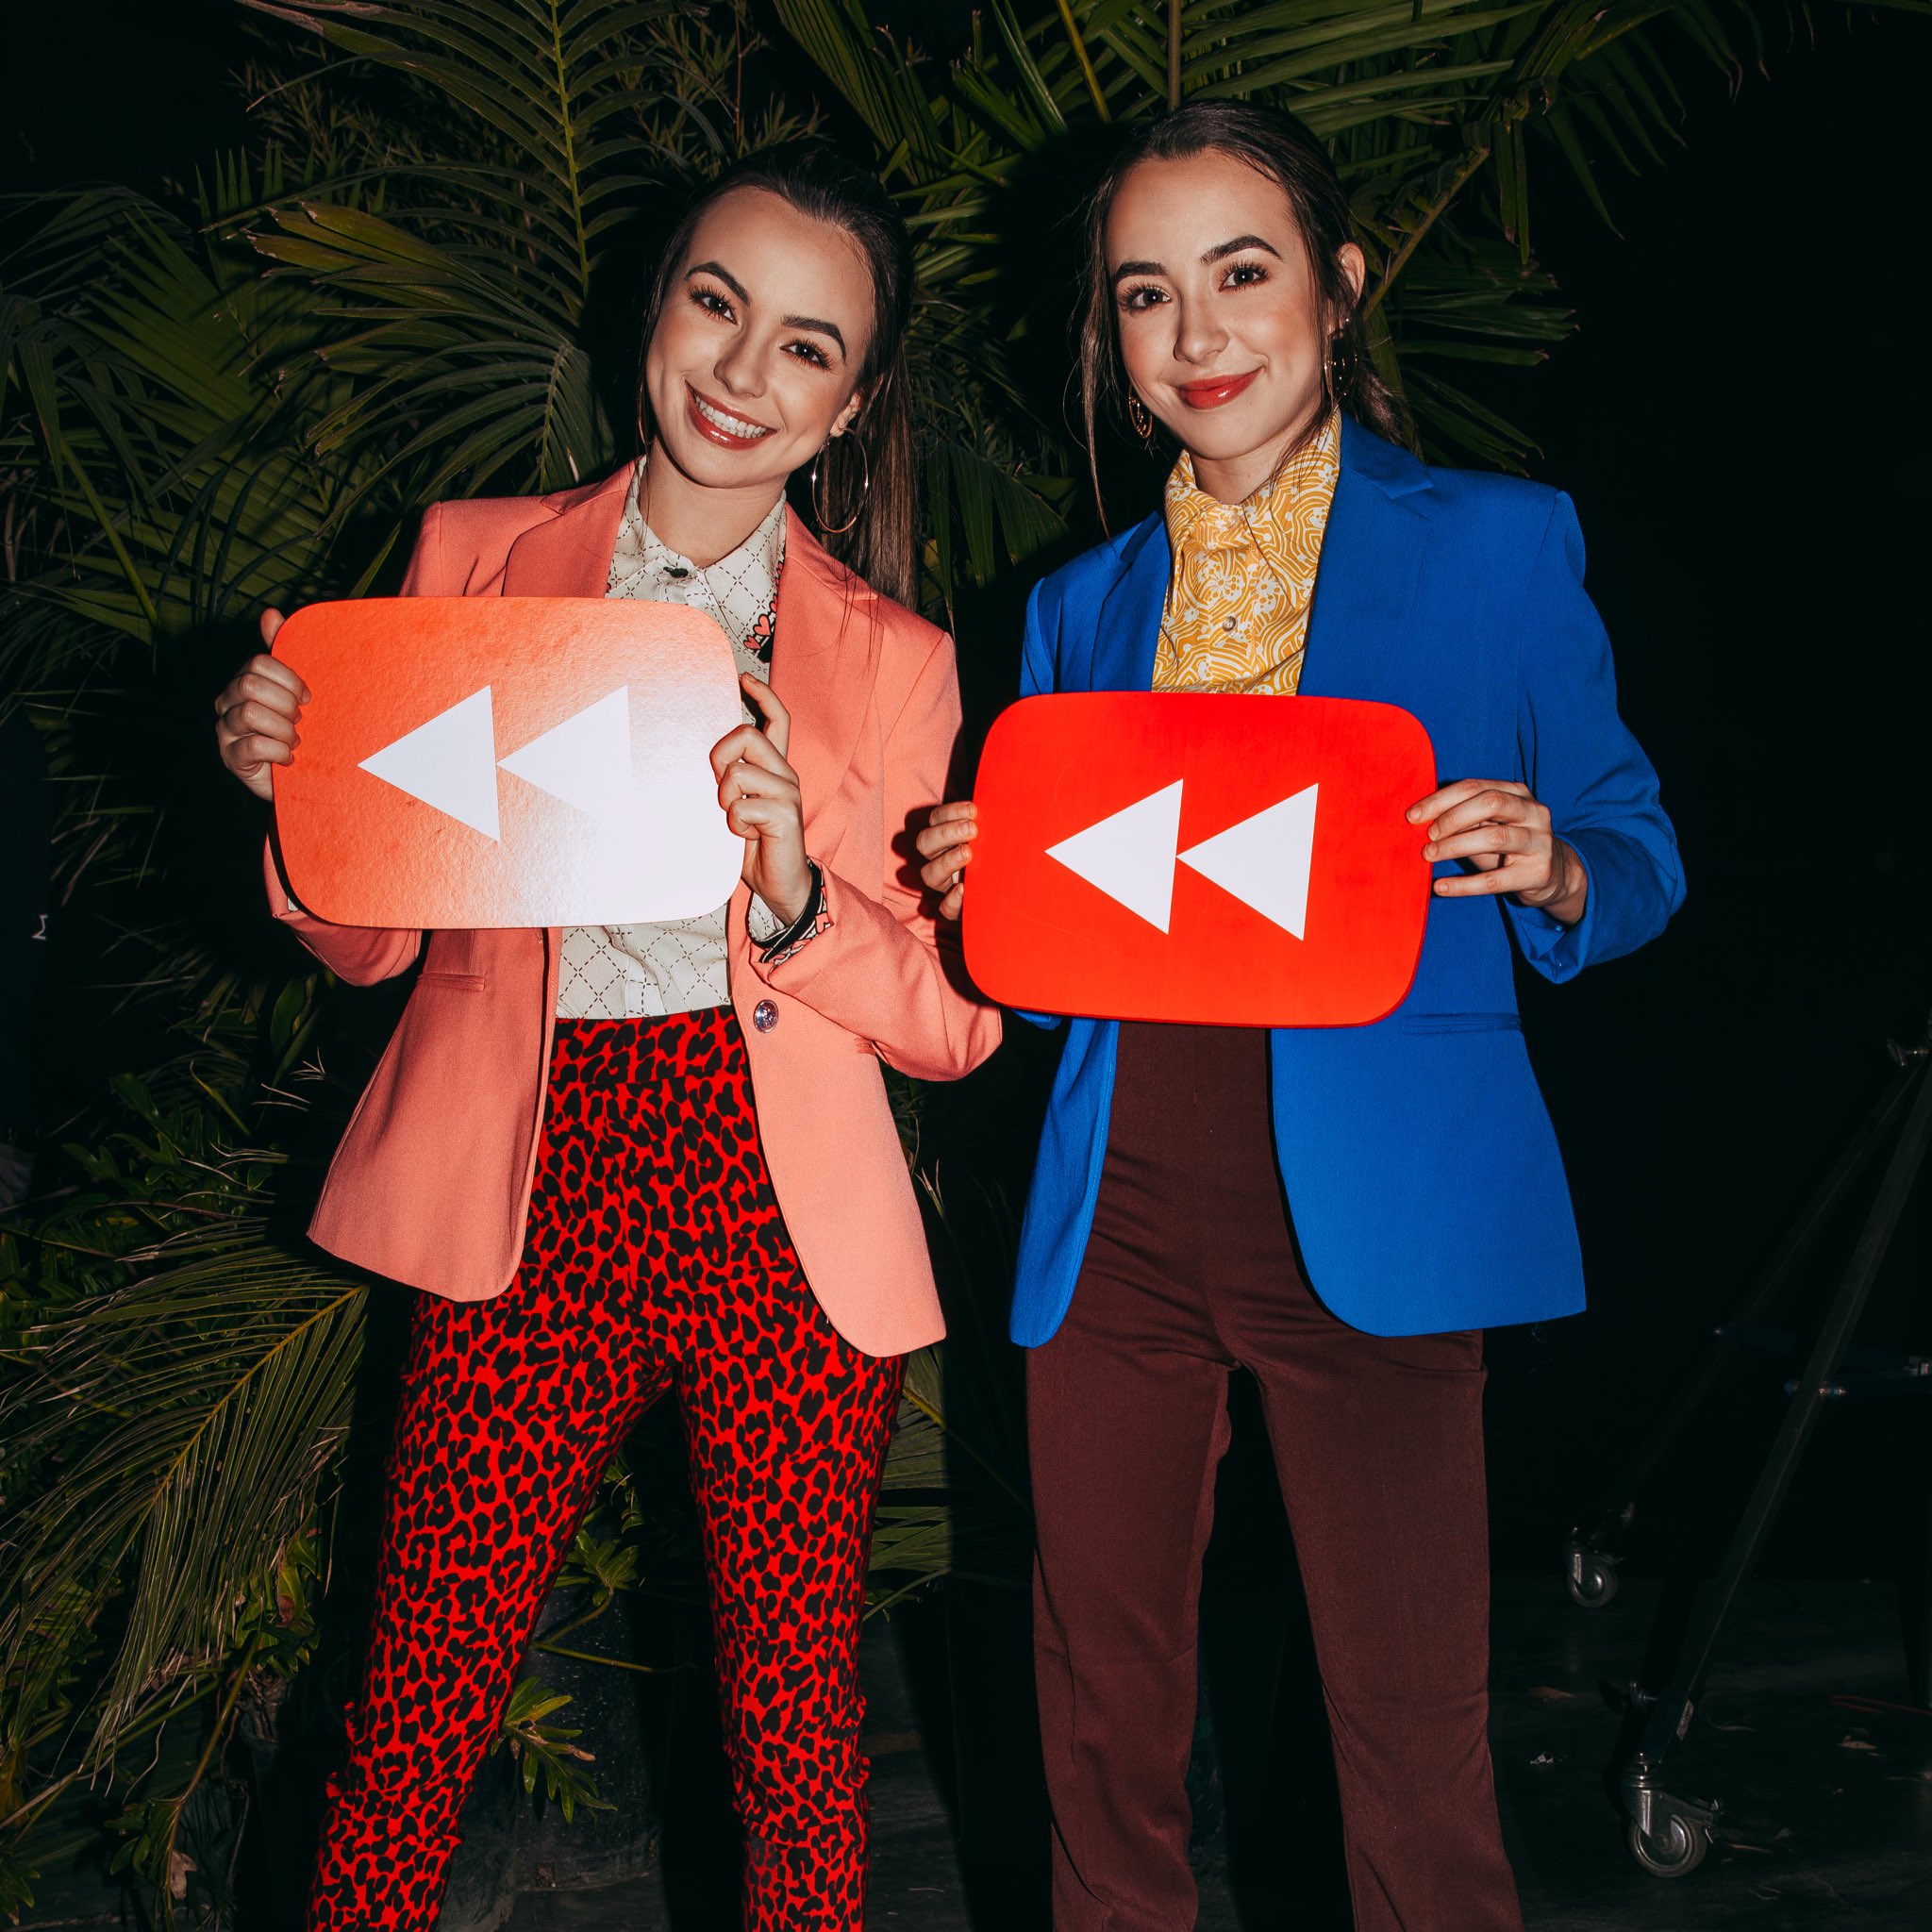 Merrell Twins on Twitter: "So honored to be a part of 2018!! Make sure to go watch it! We kind of dance a lot... 😬❤️ @YouTube https://t.co/ga7J0BclwE https://t.co/l4qgdkvMtq" / Twitter